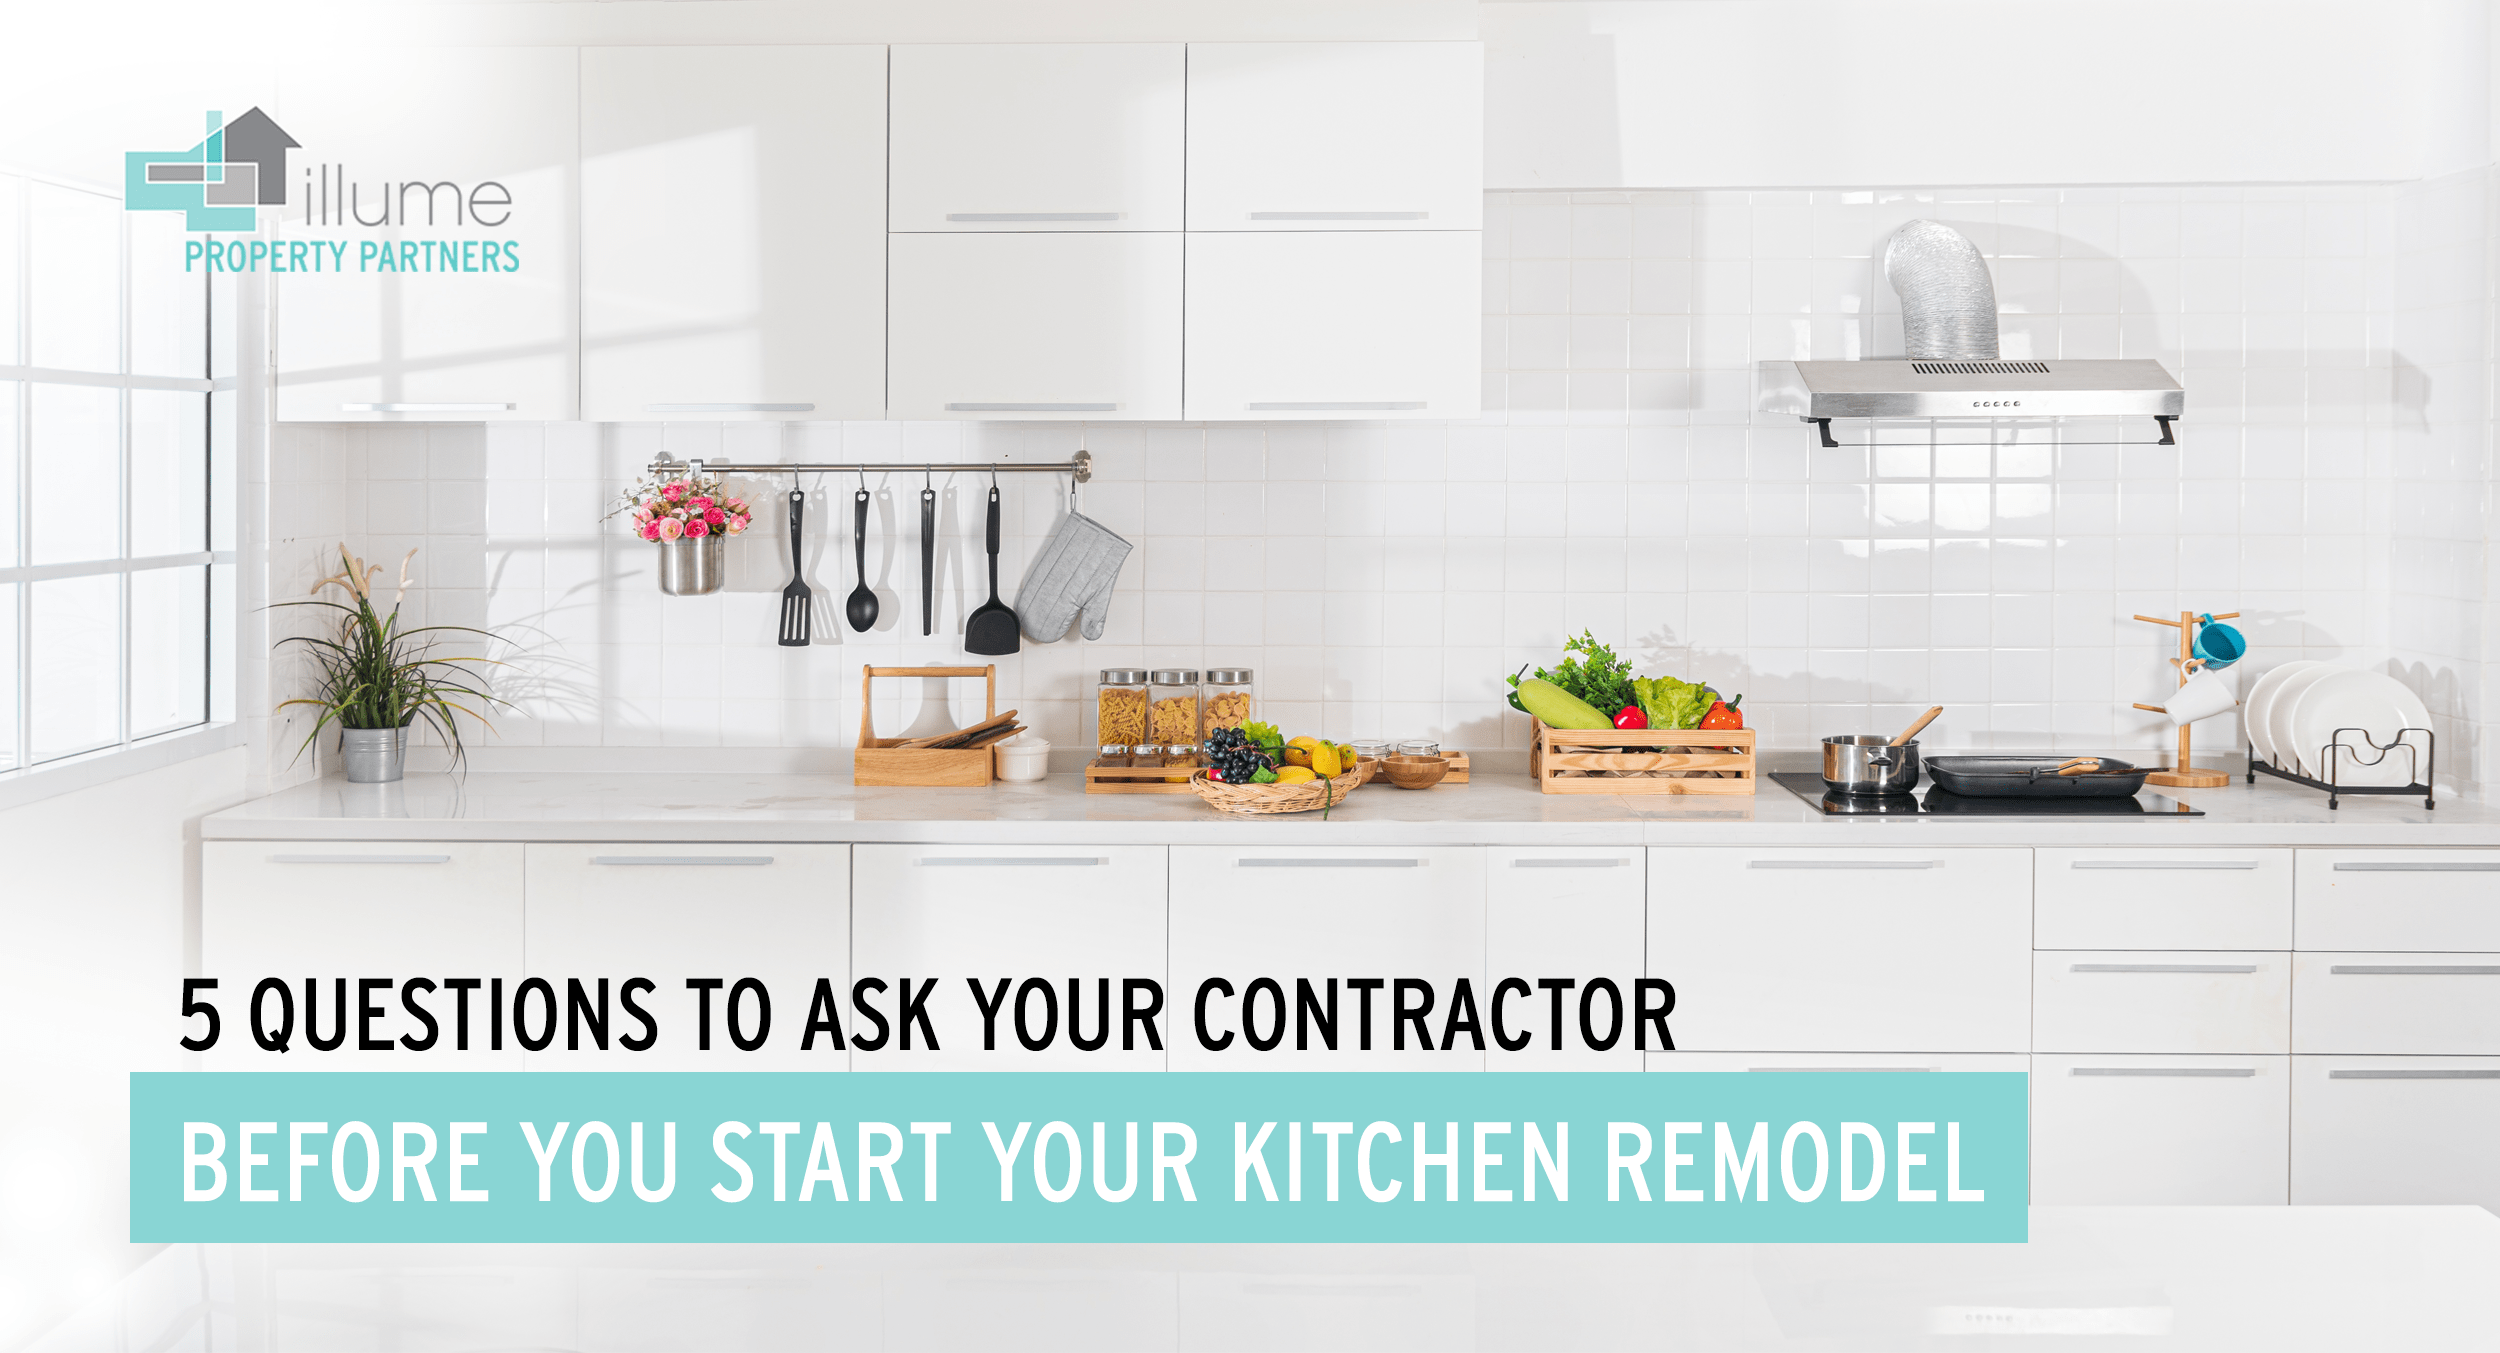 5 Questions to Ask Your Contractor Before You Start Your Kitchen Remodel